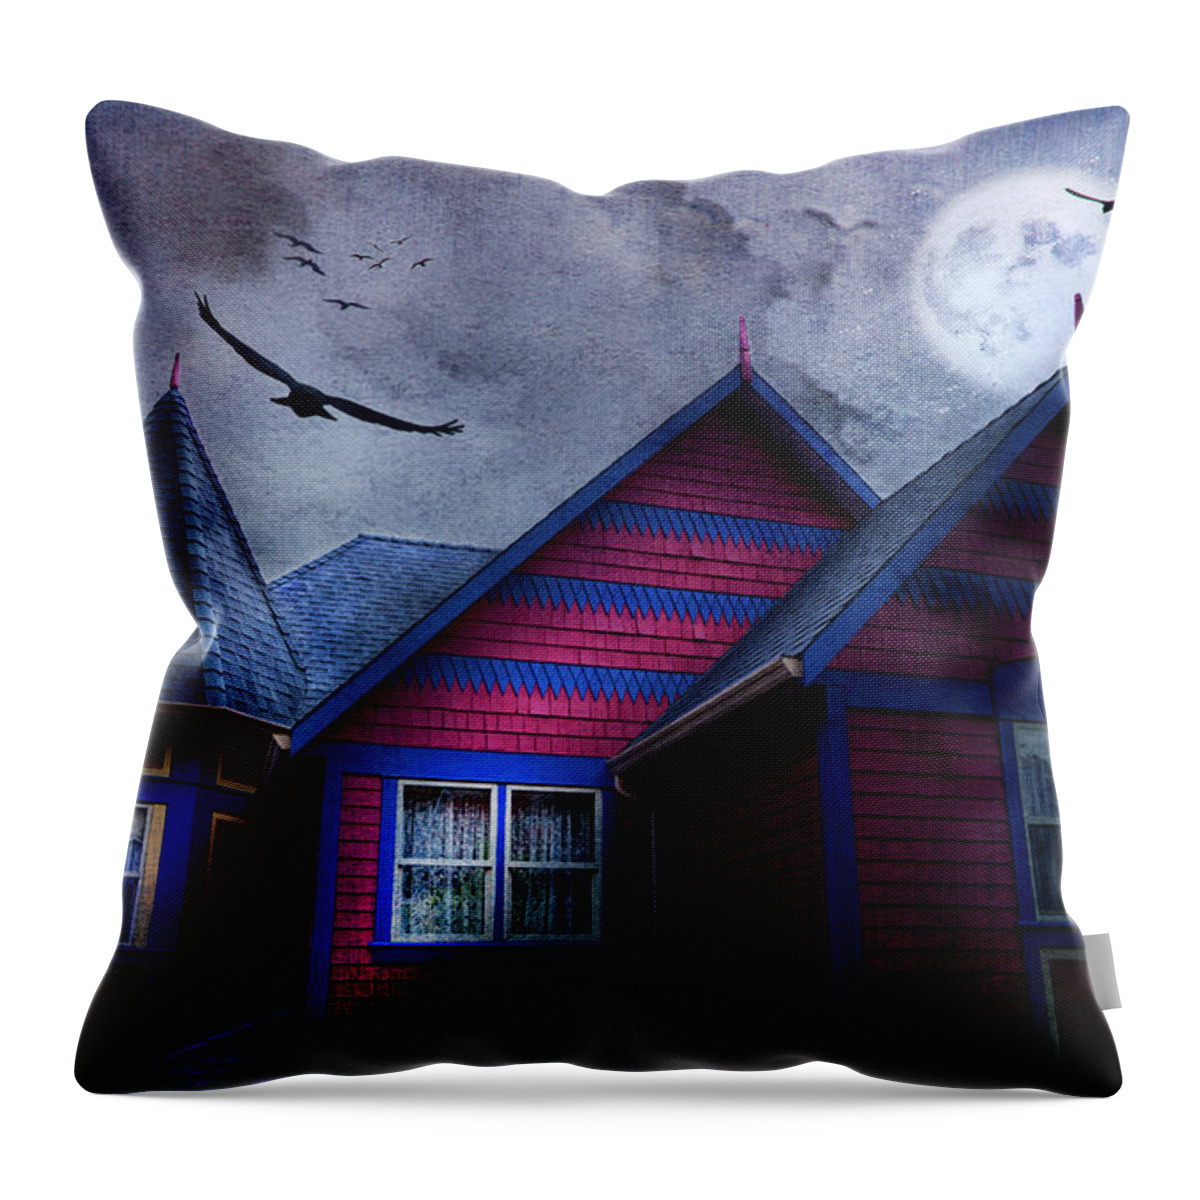 Moon Throw Pillow featuring the photograph St Paul St West by Theresa Tahara